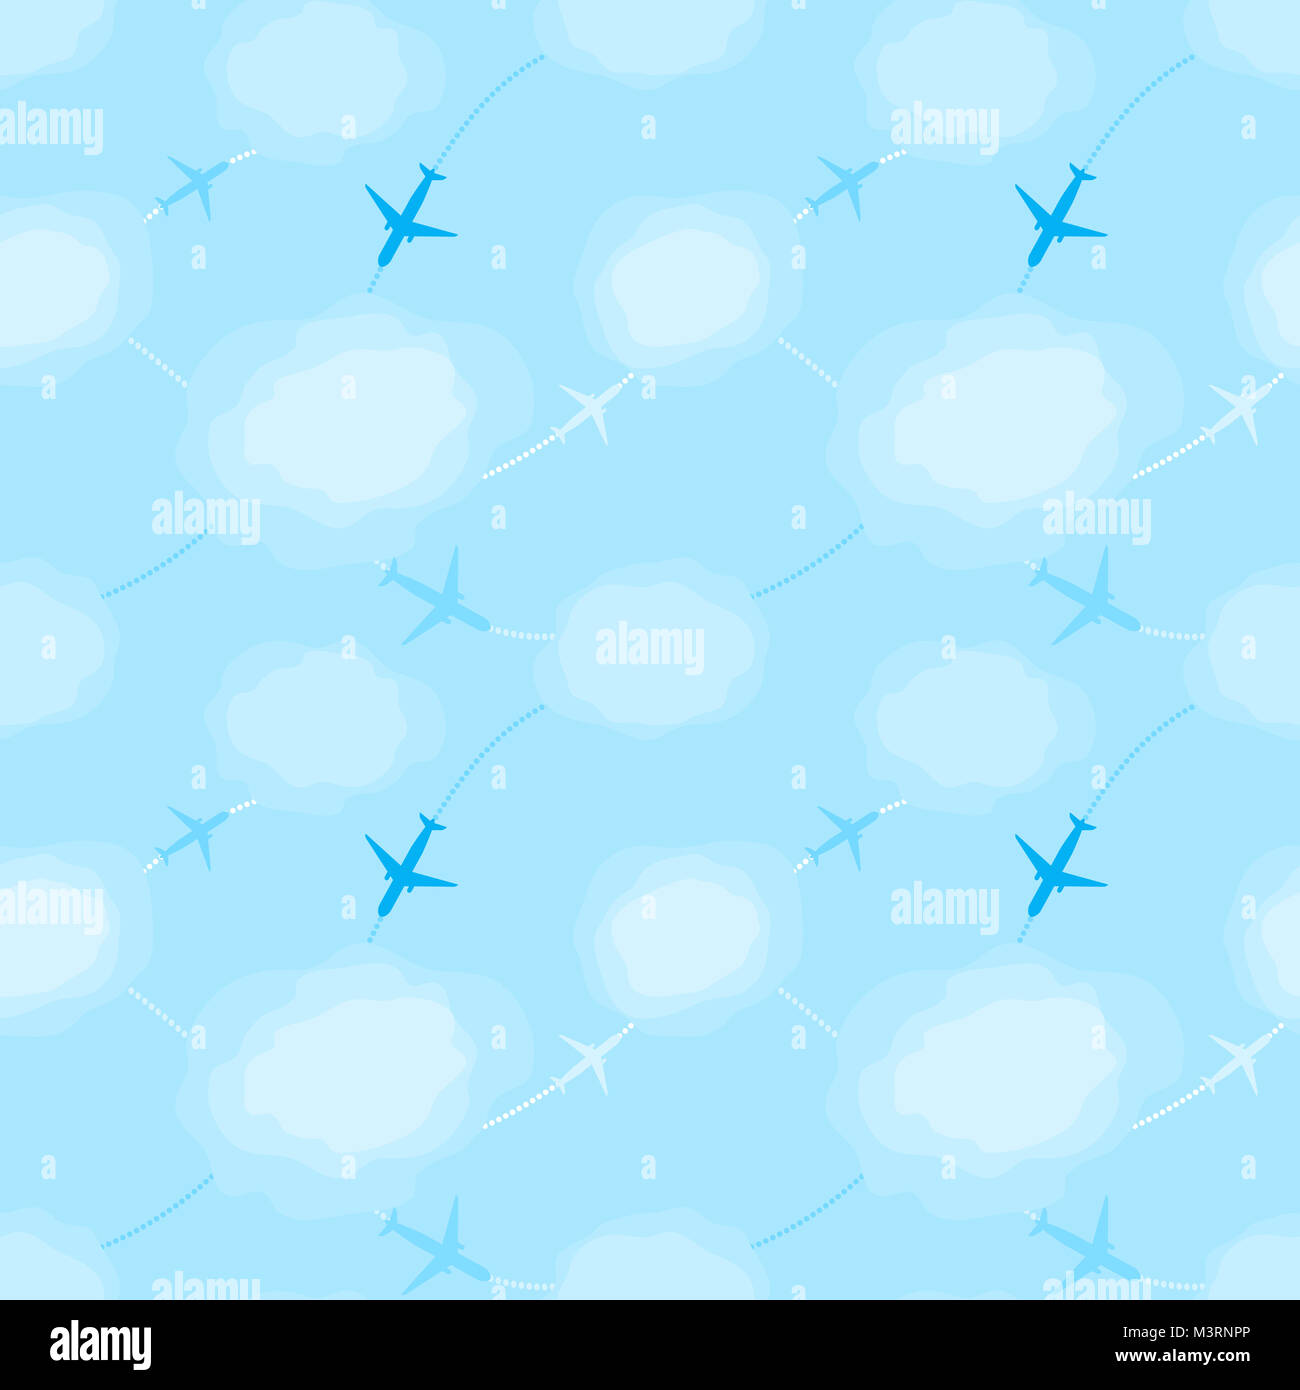 Blue seamless pattern with planes in the sky Stock Photo